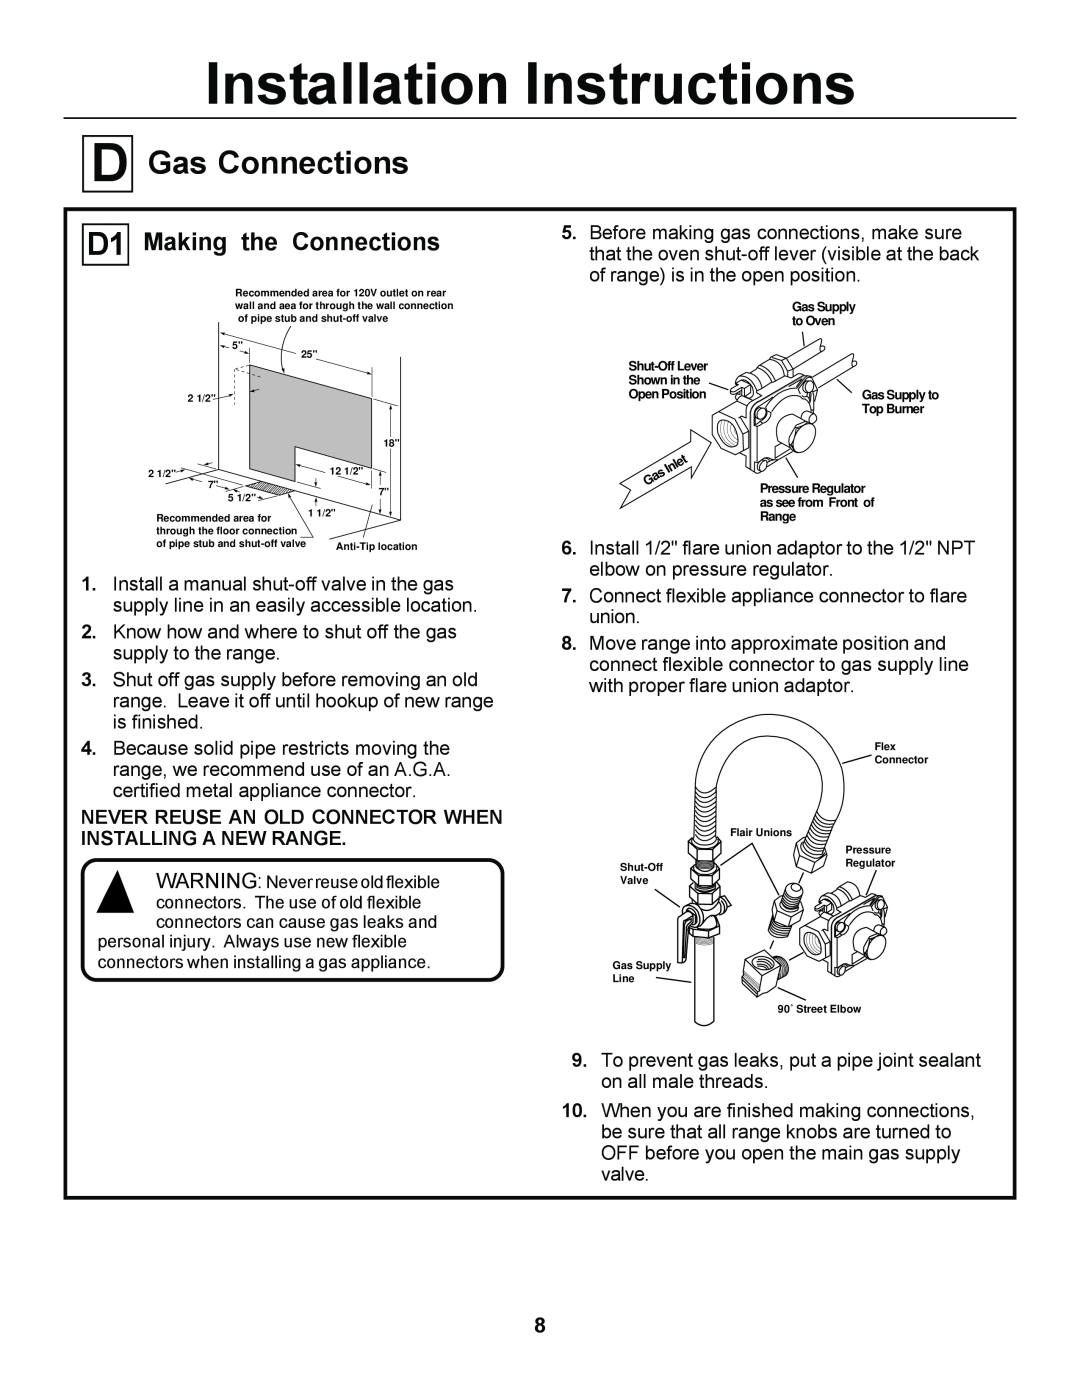 GE JGSP44, JGSP23 manual Gas Connections, D1 Making the Connections, Installation Instructions 